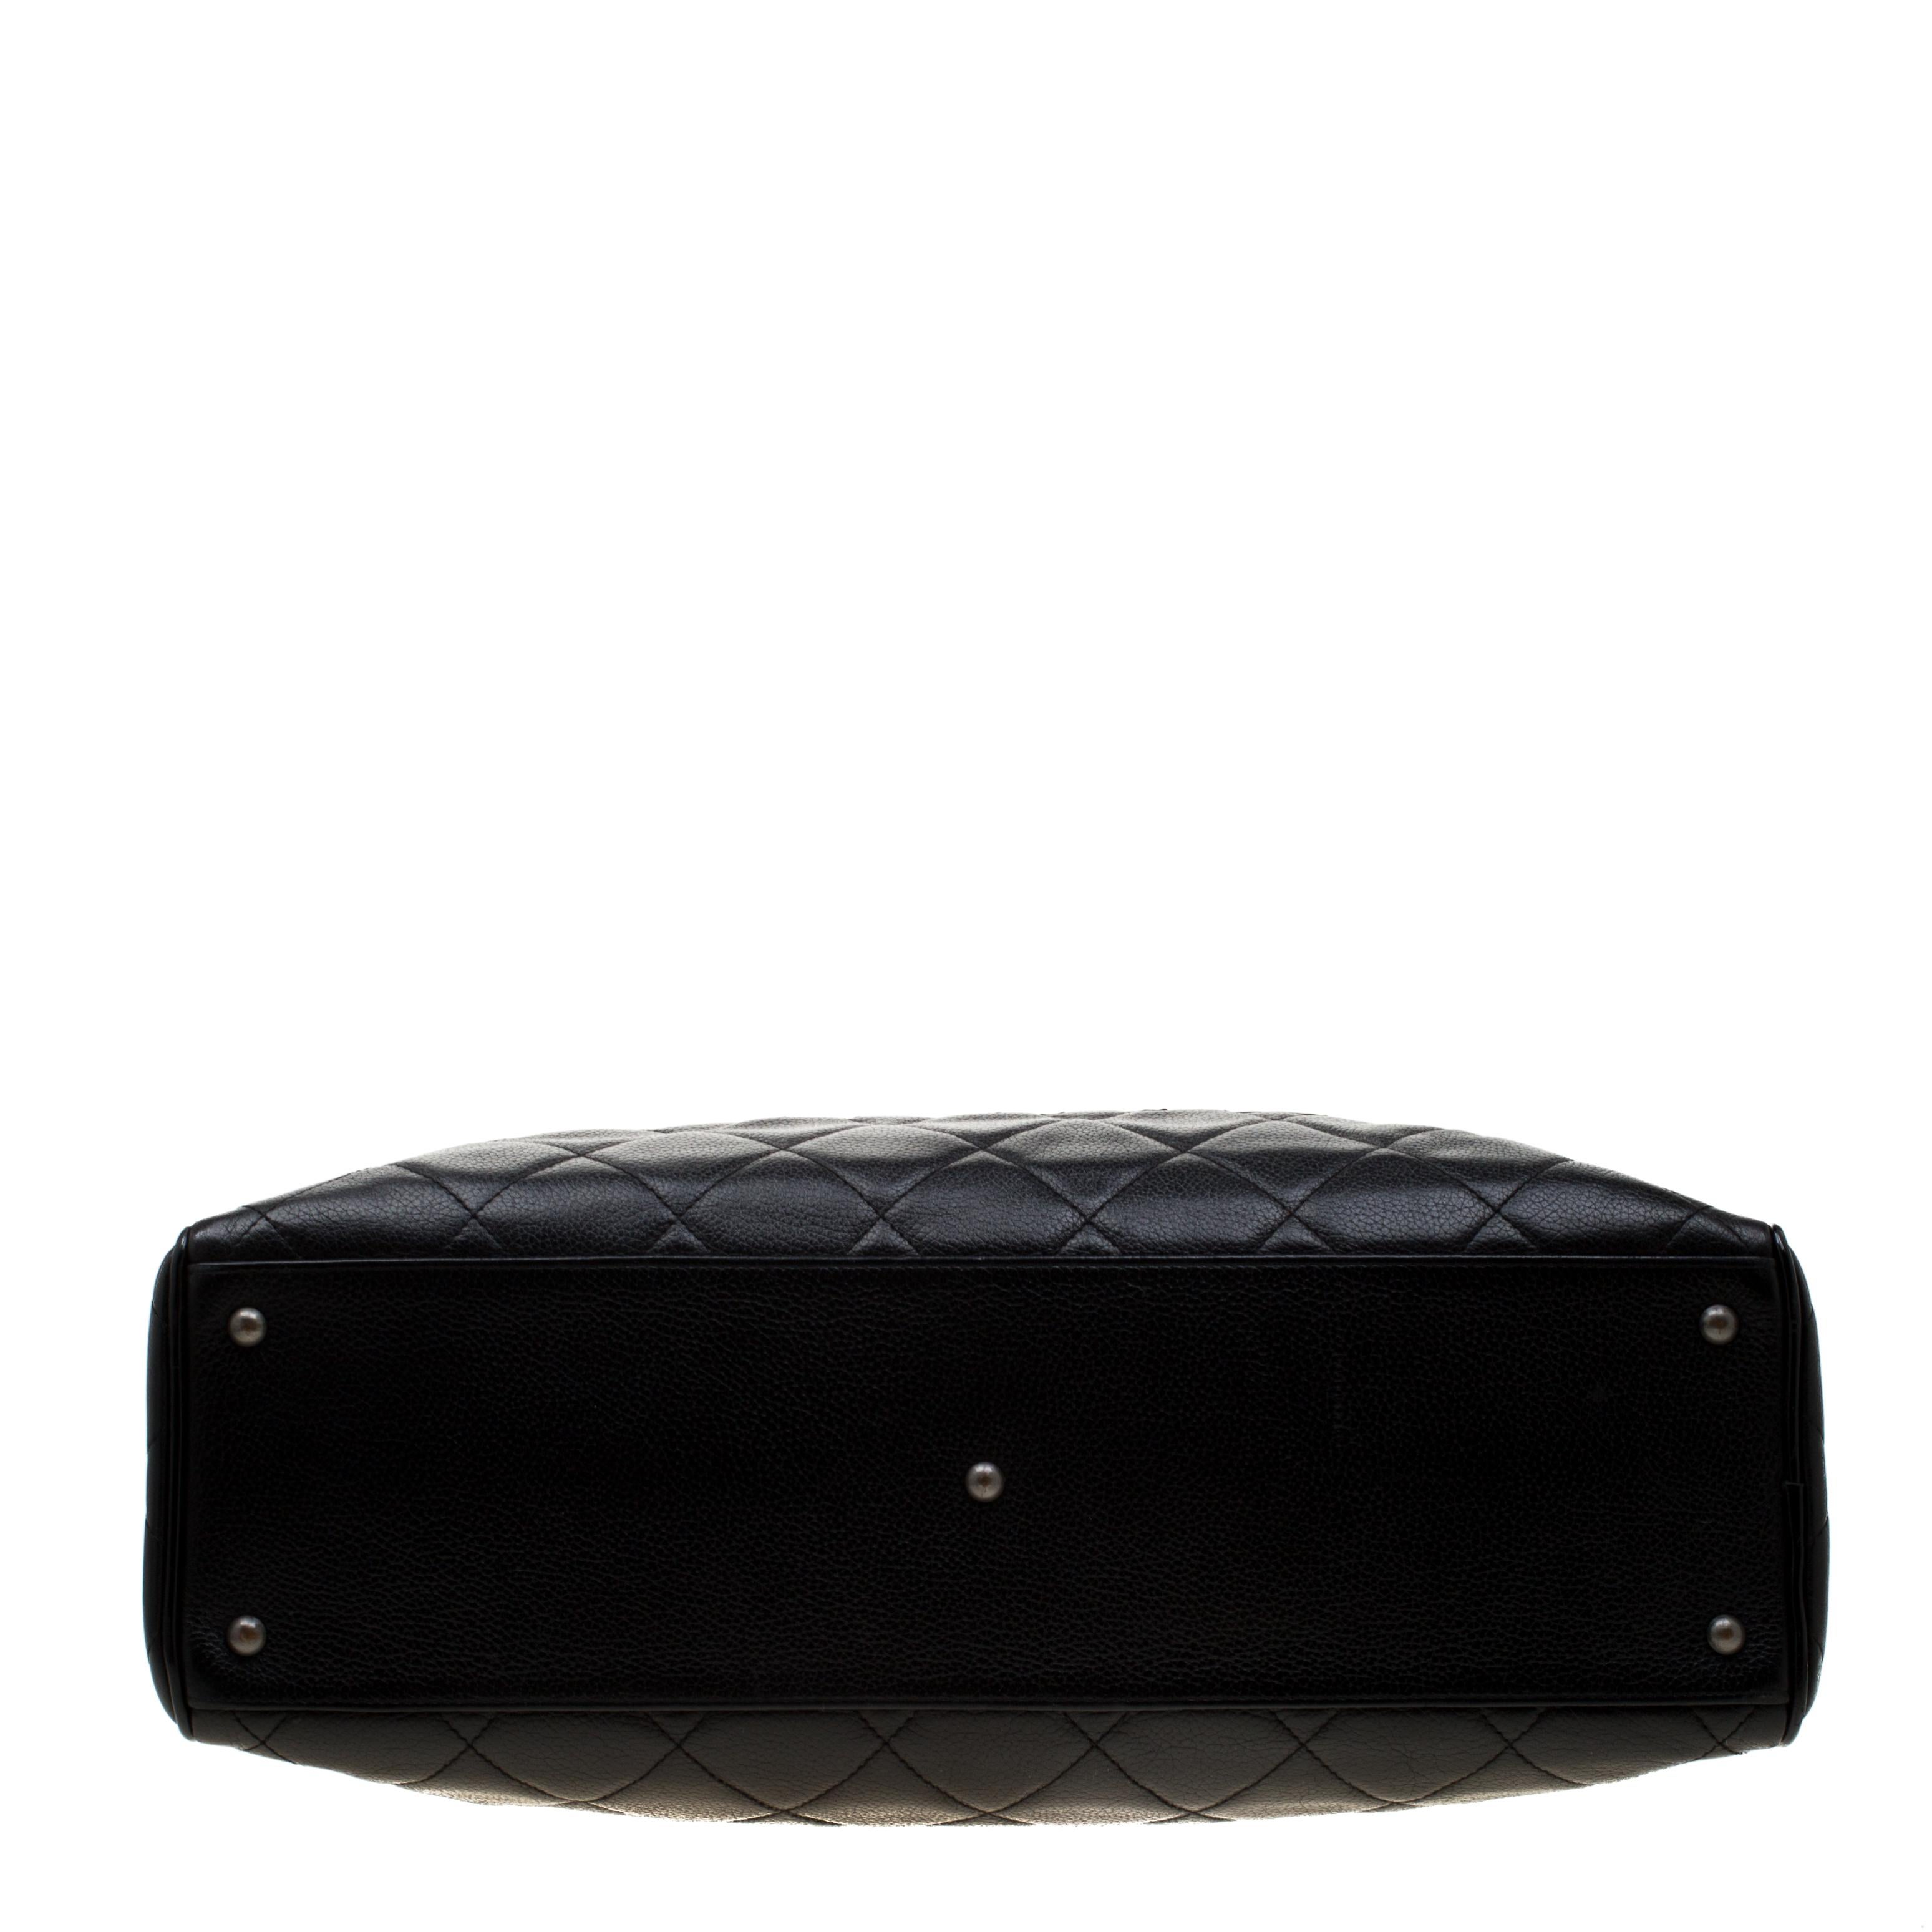 Chanel Black Quilted Leather Enamel Boston Bag 1